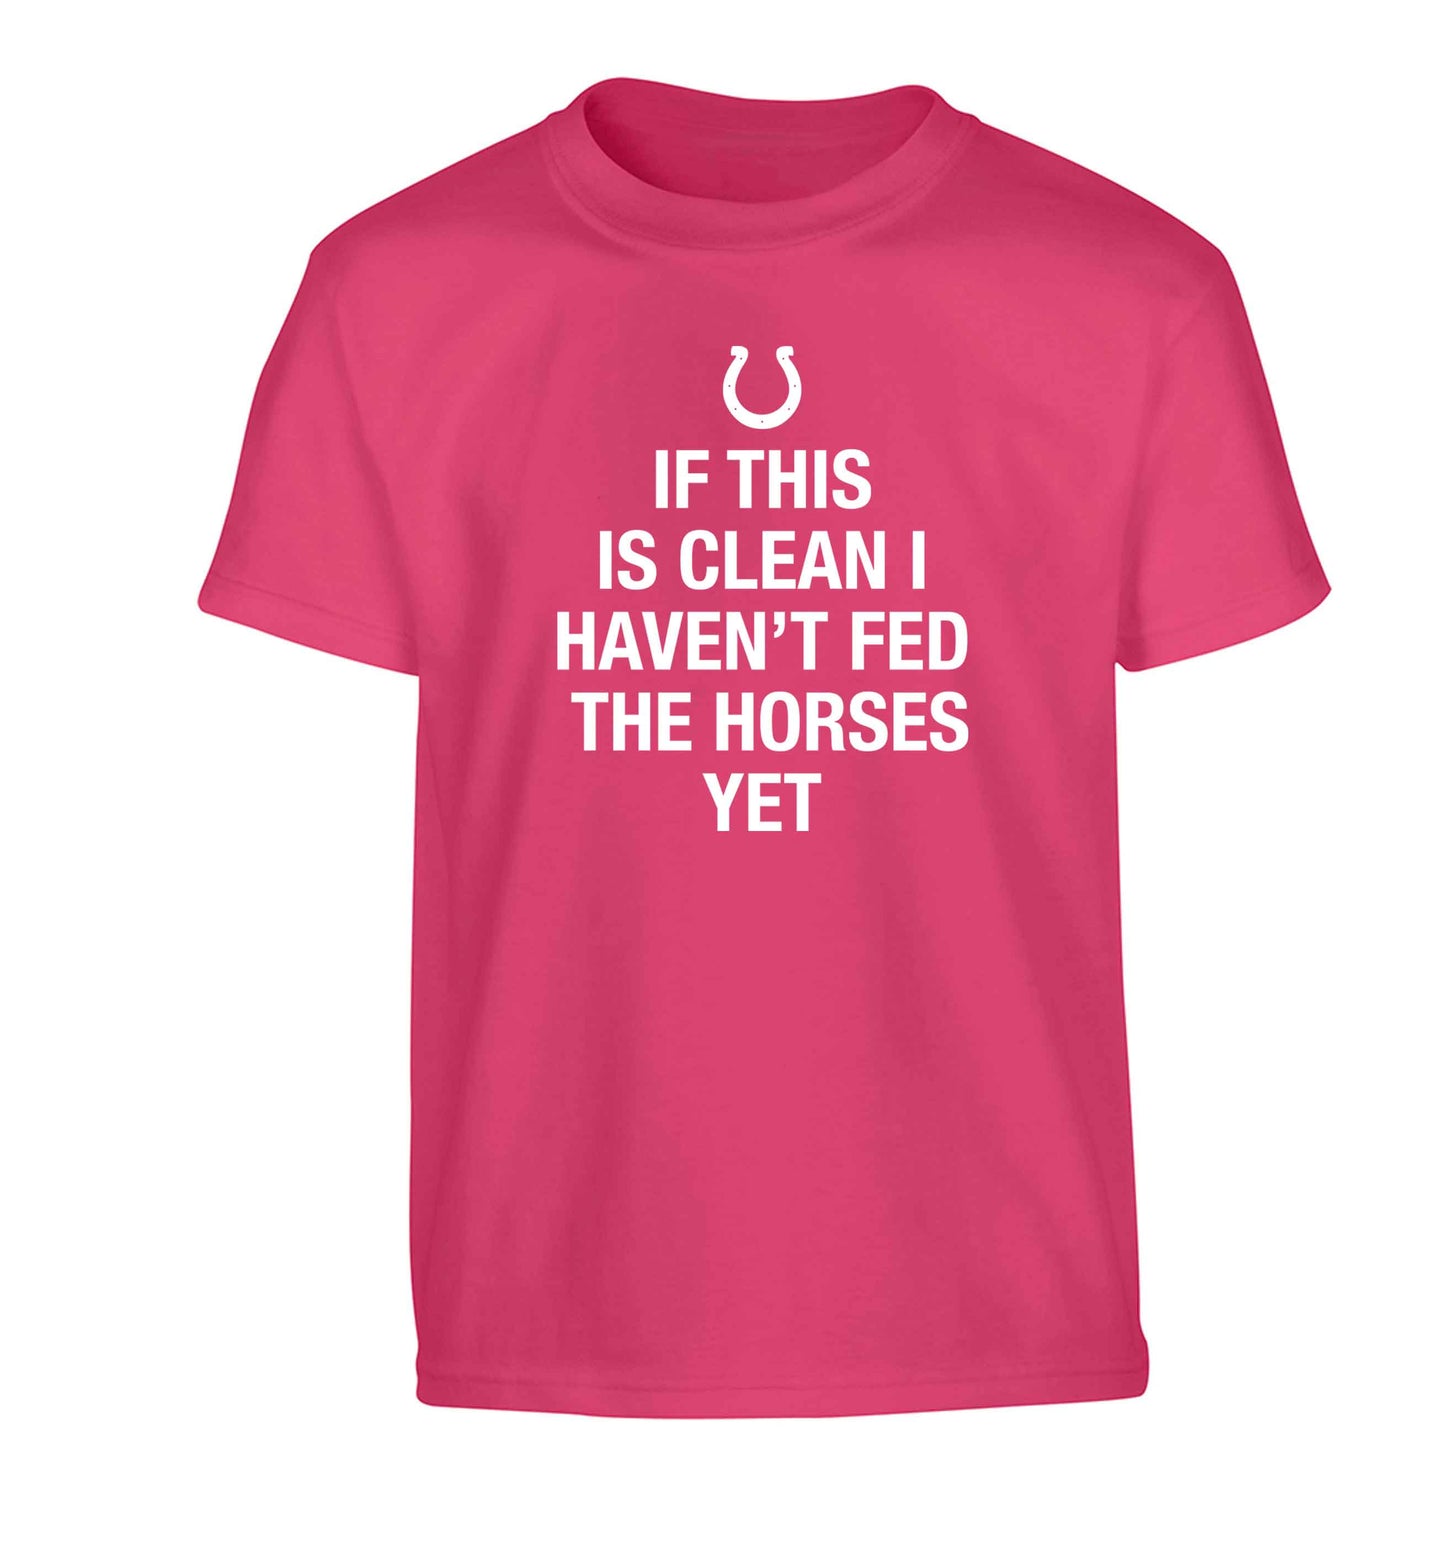 If this isn't clean I haven't fed the horses yet Children's pink Tshirt 12-13 Years